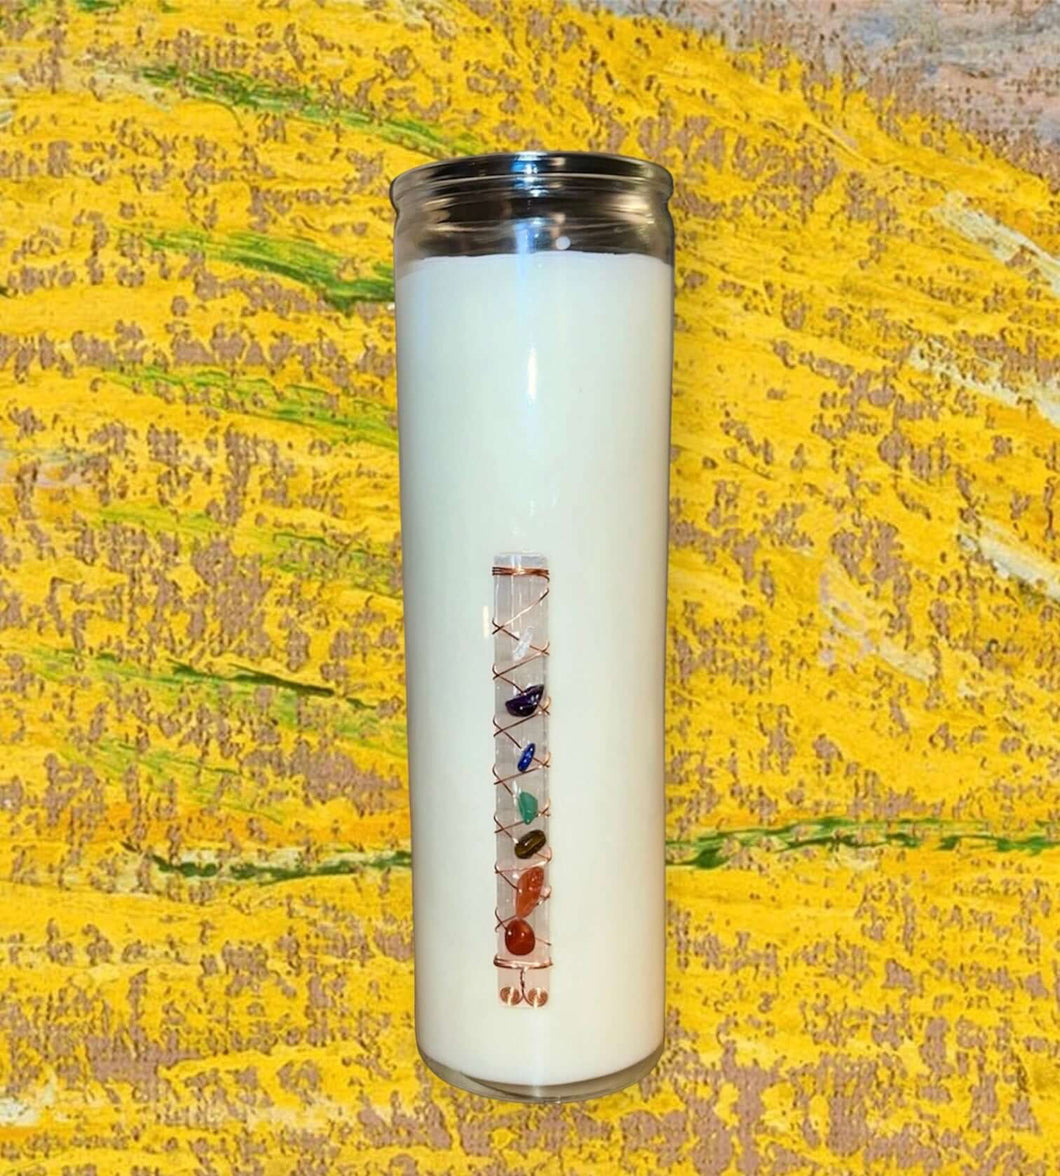 Citrus Agave 7 Day Chakra Prayer Candle